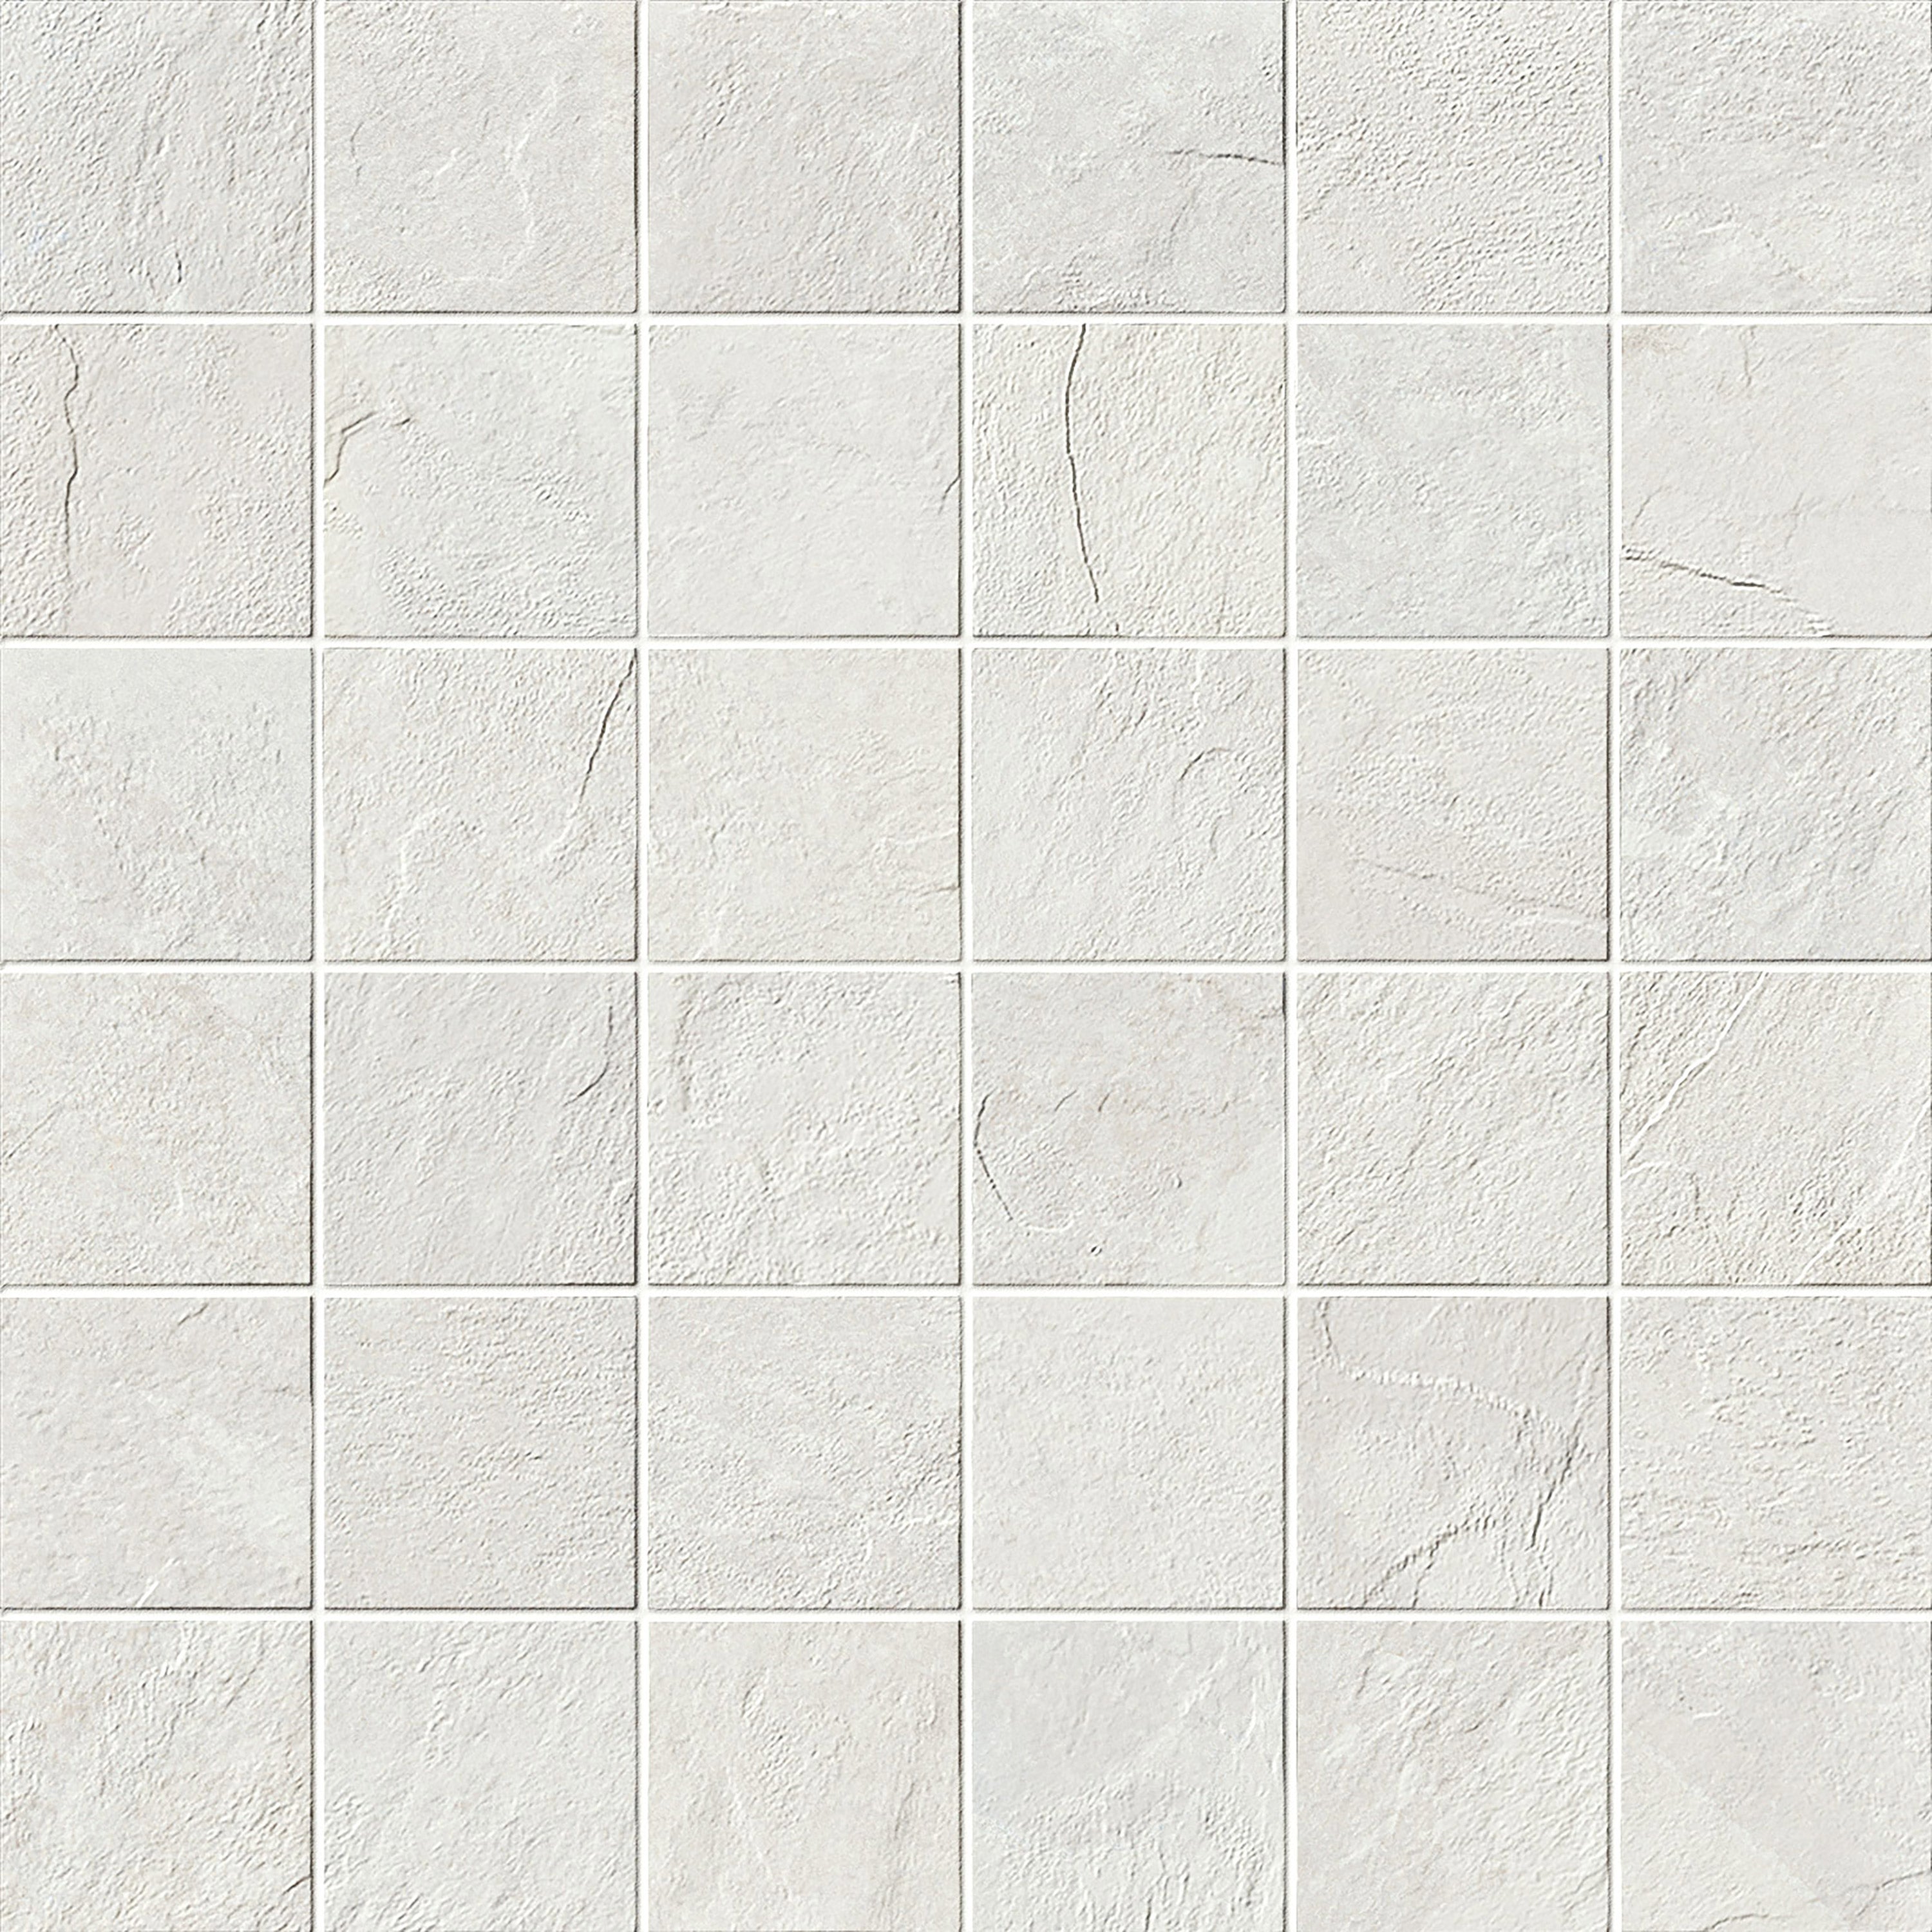 landmark 9mm essence montauk white straight stack 2x2 mosaic 12x12x9mm matte rectified porcelain tile distributed by surface group international